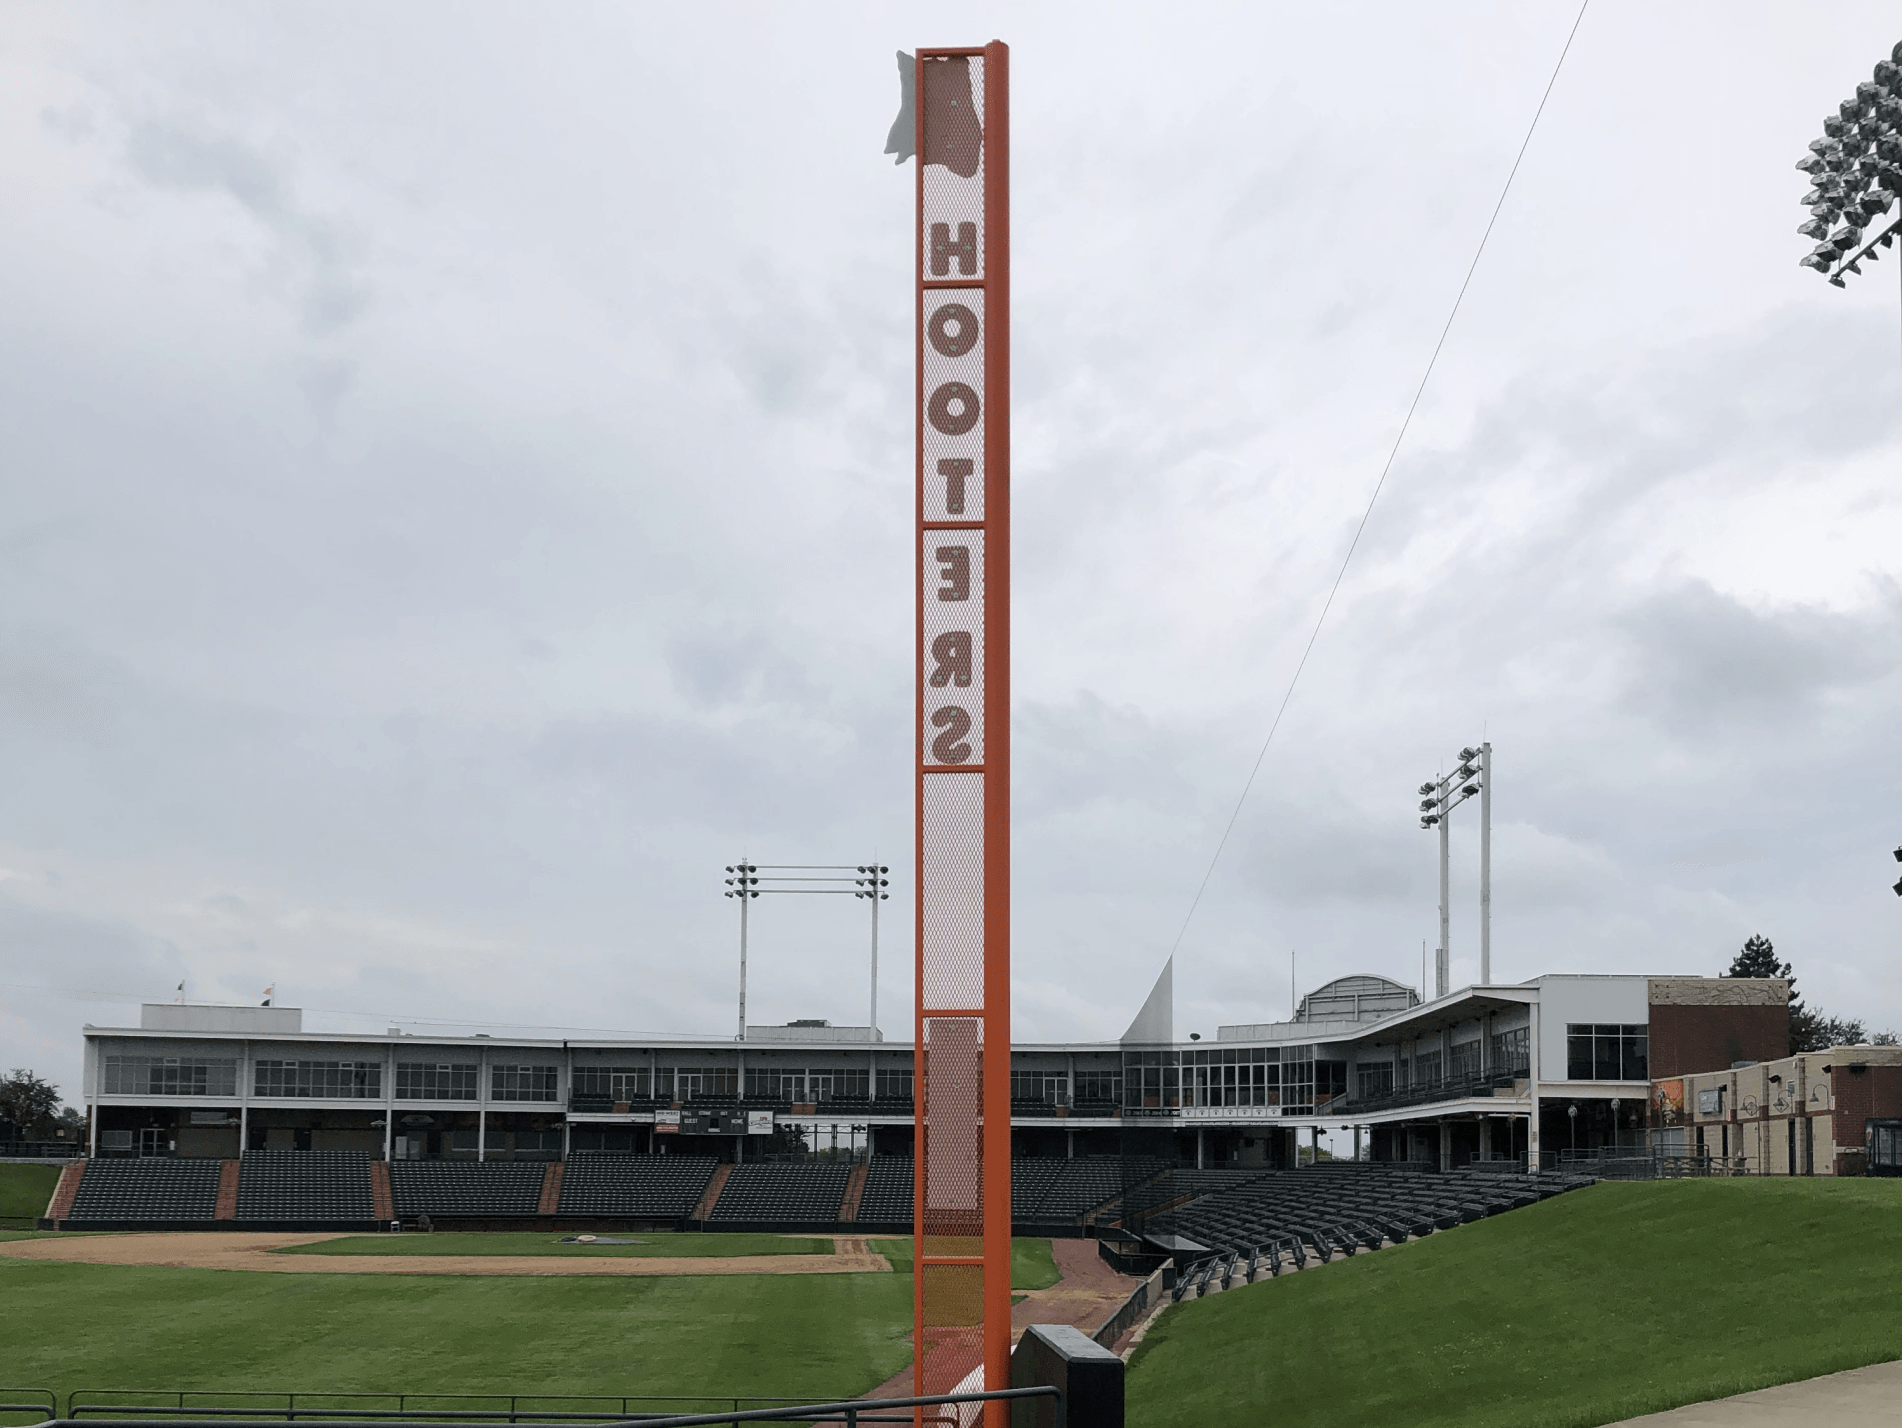 A baseball field with a hooters sign in the foreground